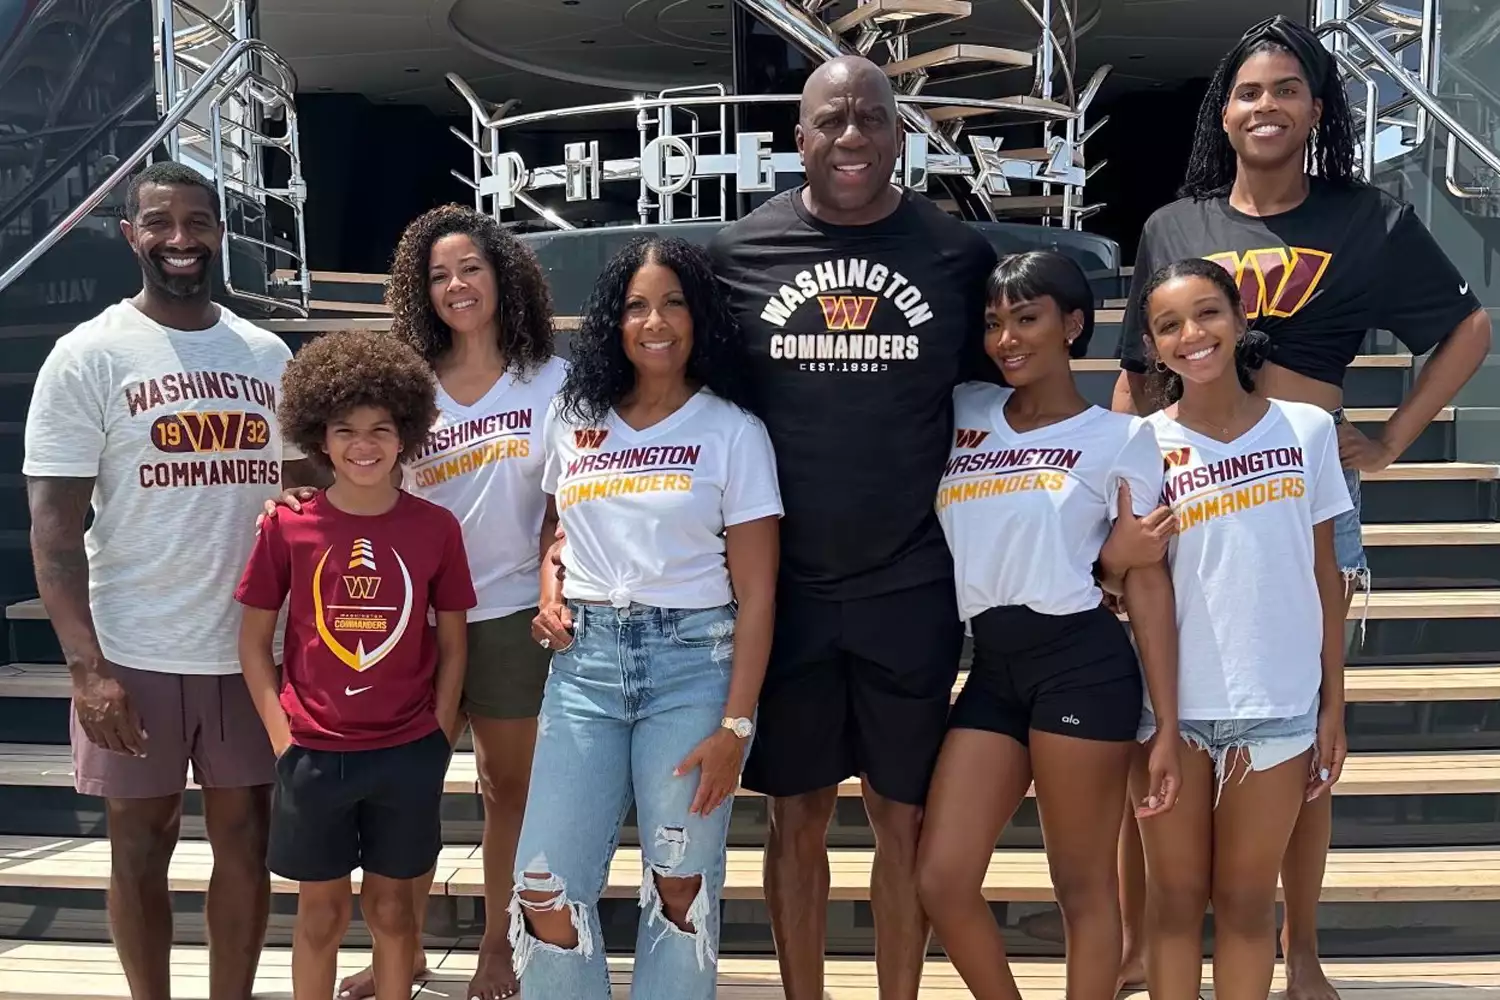 Magic Johnson and Family Show Off Commanders Merch During Yacht Vacation